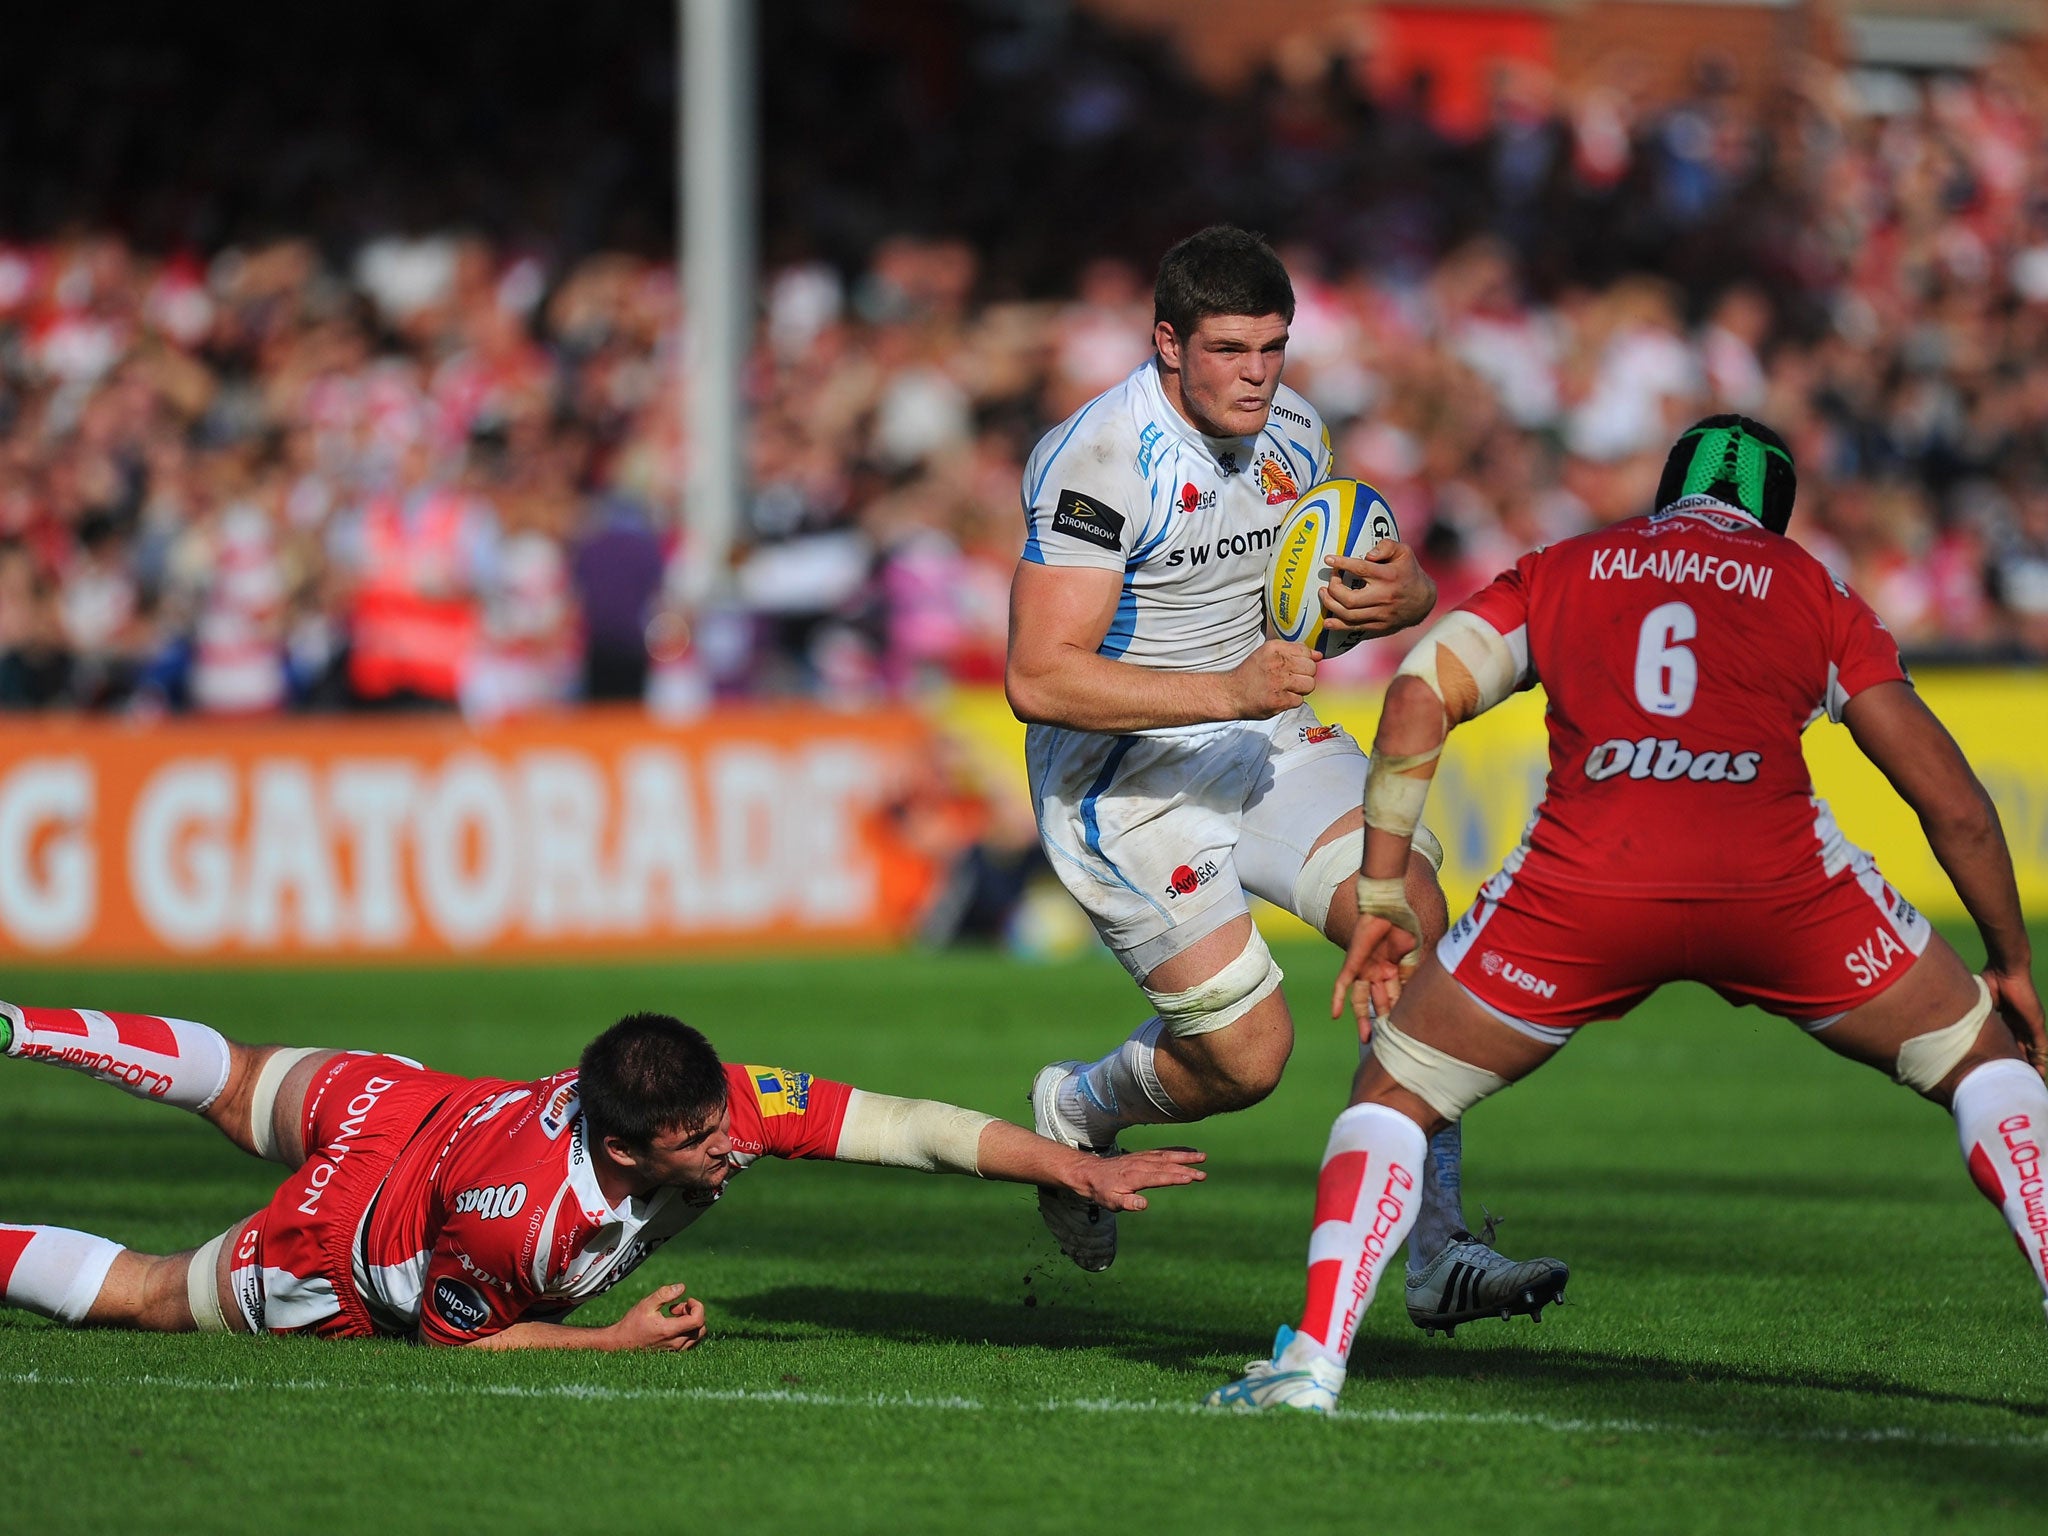 Exeter's Dave Ewers, centre, will aim to build on victory against Cardiff